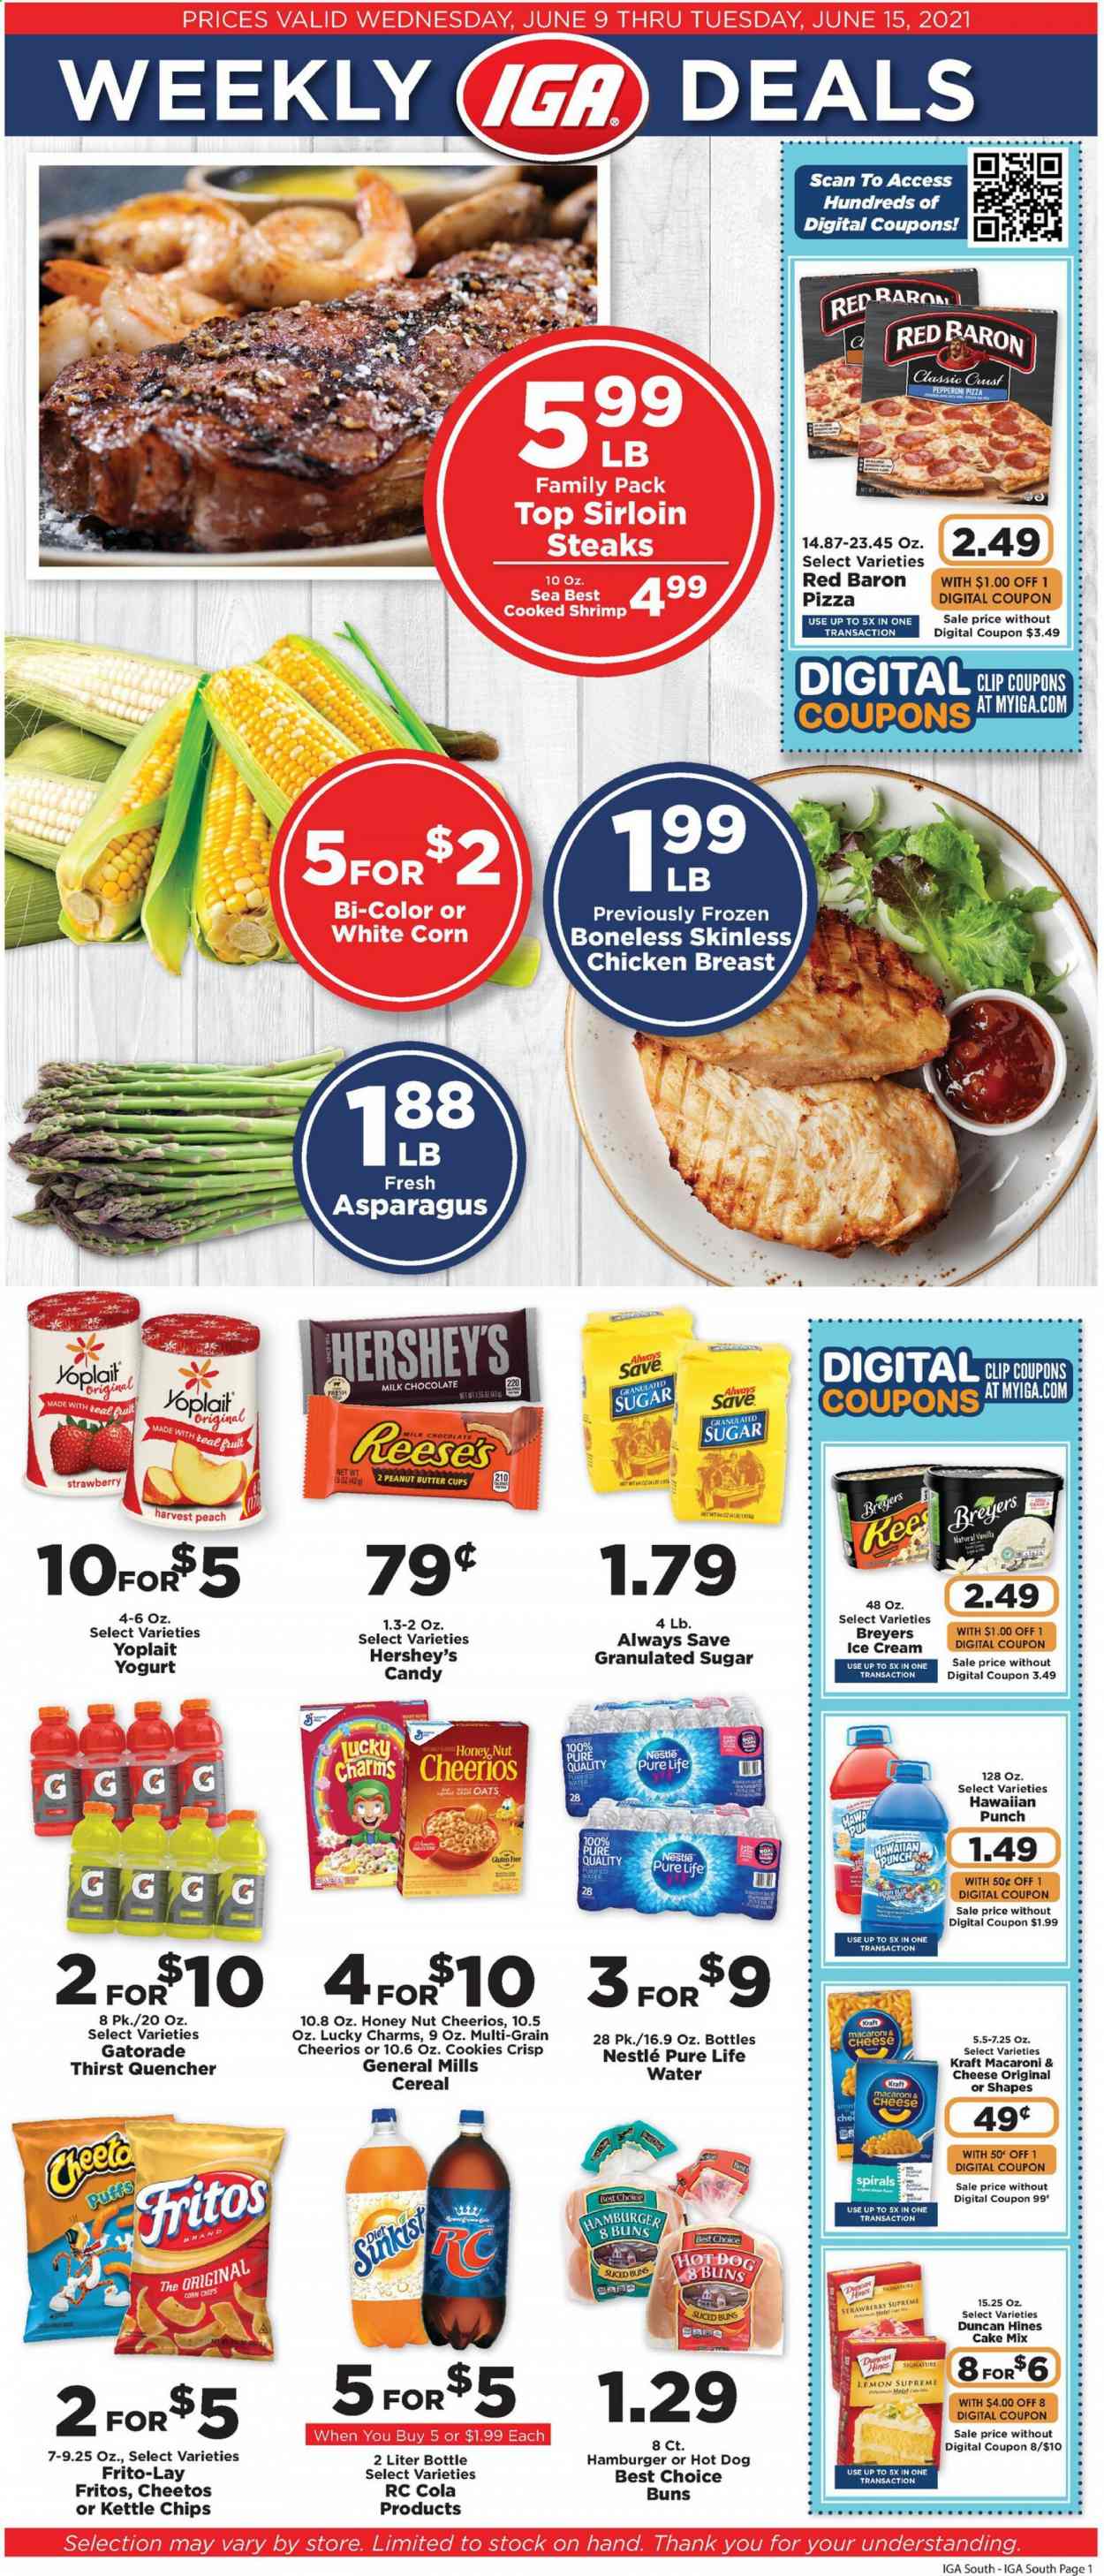 thumbnail - IGA Flyer - 06/09/2021 - 06/15/2021 - Sales products - buns, puffs, cake mix, asparagus, shrimps, macaroni & cheese, hot dog, hamburger, Kraft®, pepperoni, yoghurt, Yoplait, ice cream, Reese's, Hershey's, Red Baron, cookies, milk chocolate, Nestlé, peanut butter cups, Fritos, Cheetos, corn chips, Frito-Lay, granulated sugar, sugar, oats, cereals, Cheerios, Gatorade, purified water, Pure Life Water, chicken breasts, steak, sirloin steak. Page 1.